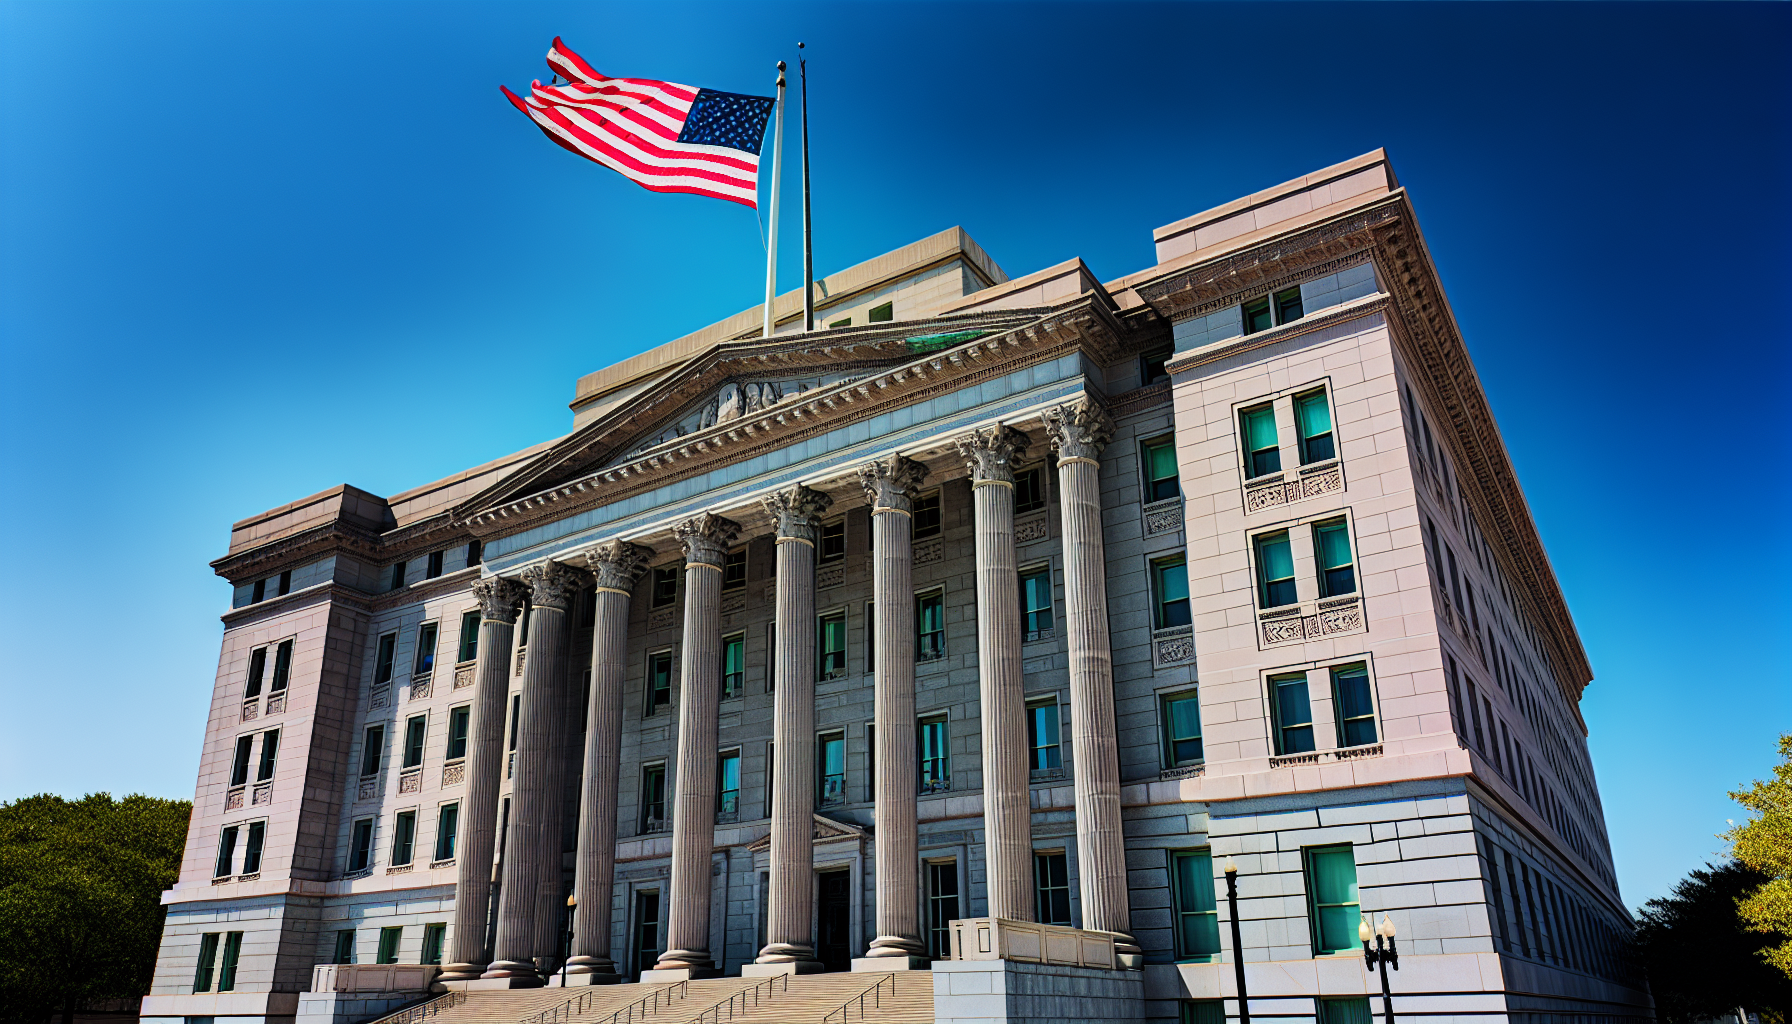 Federal courthouse with the United States flag flying